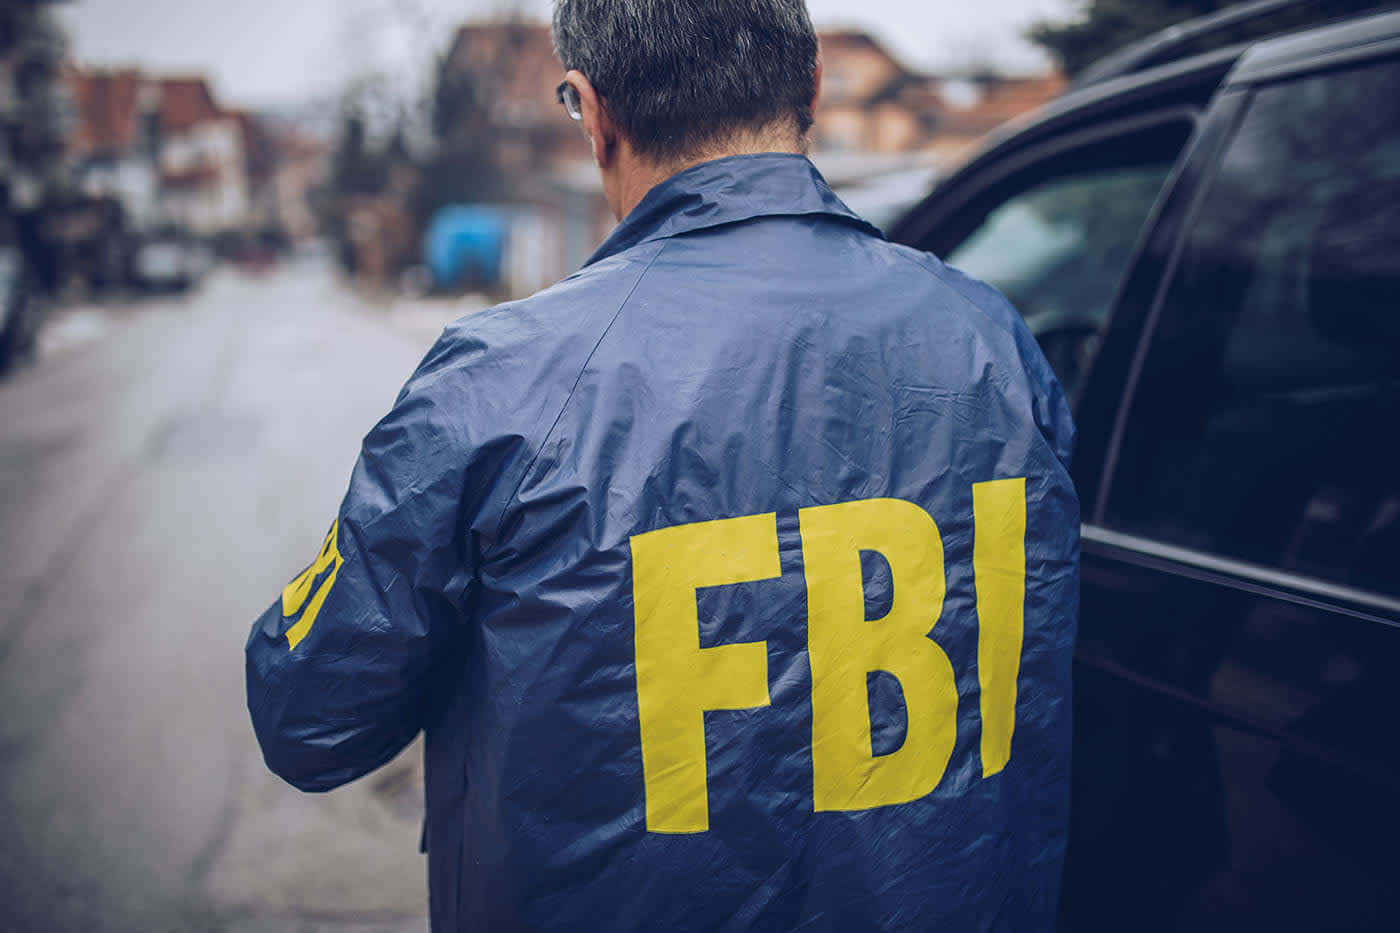 Fbi Agent Standing Next To A Car Background